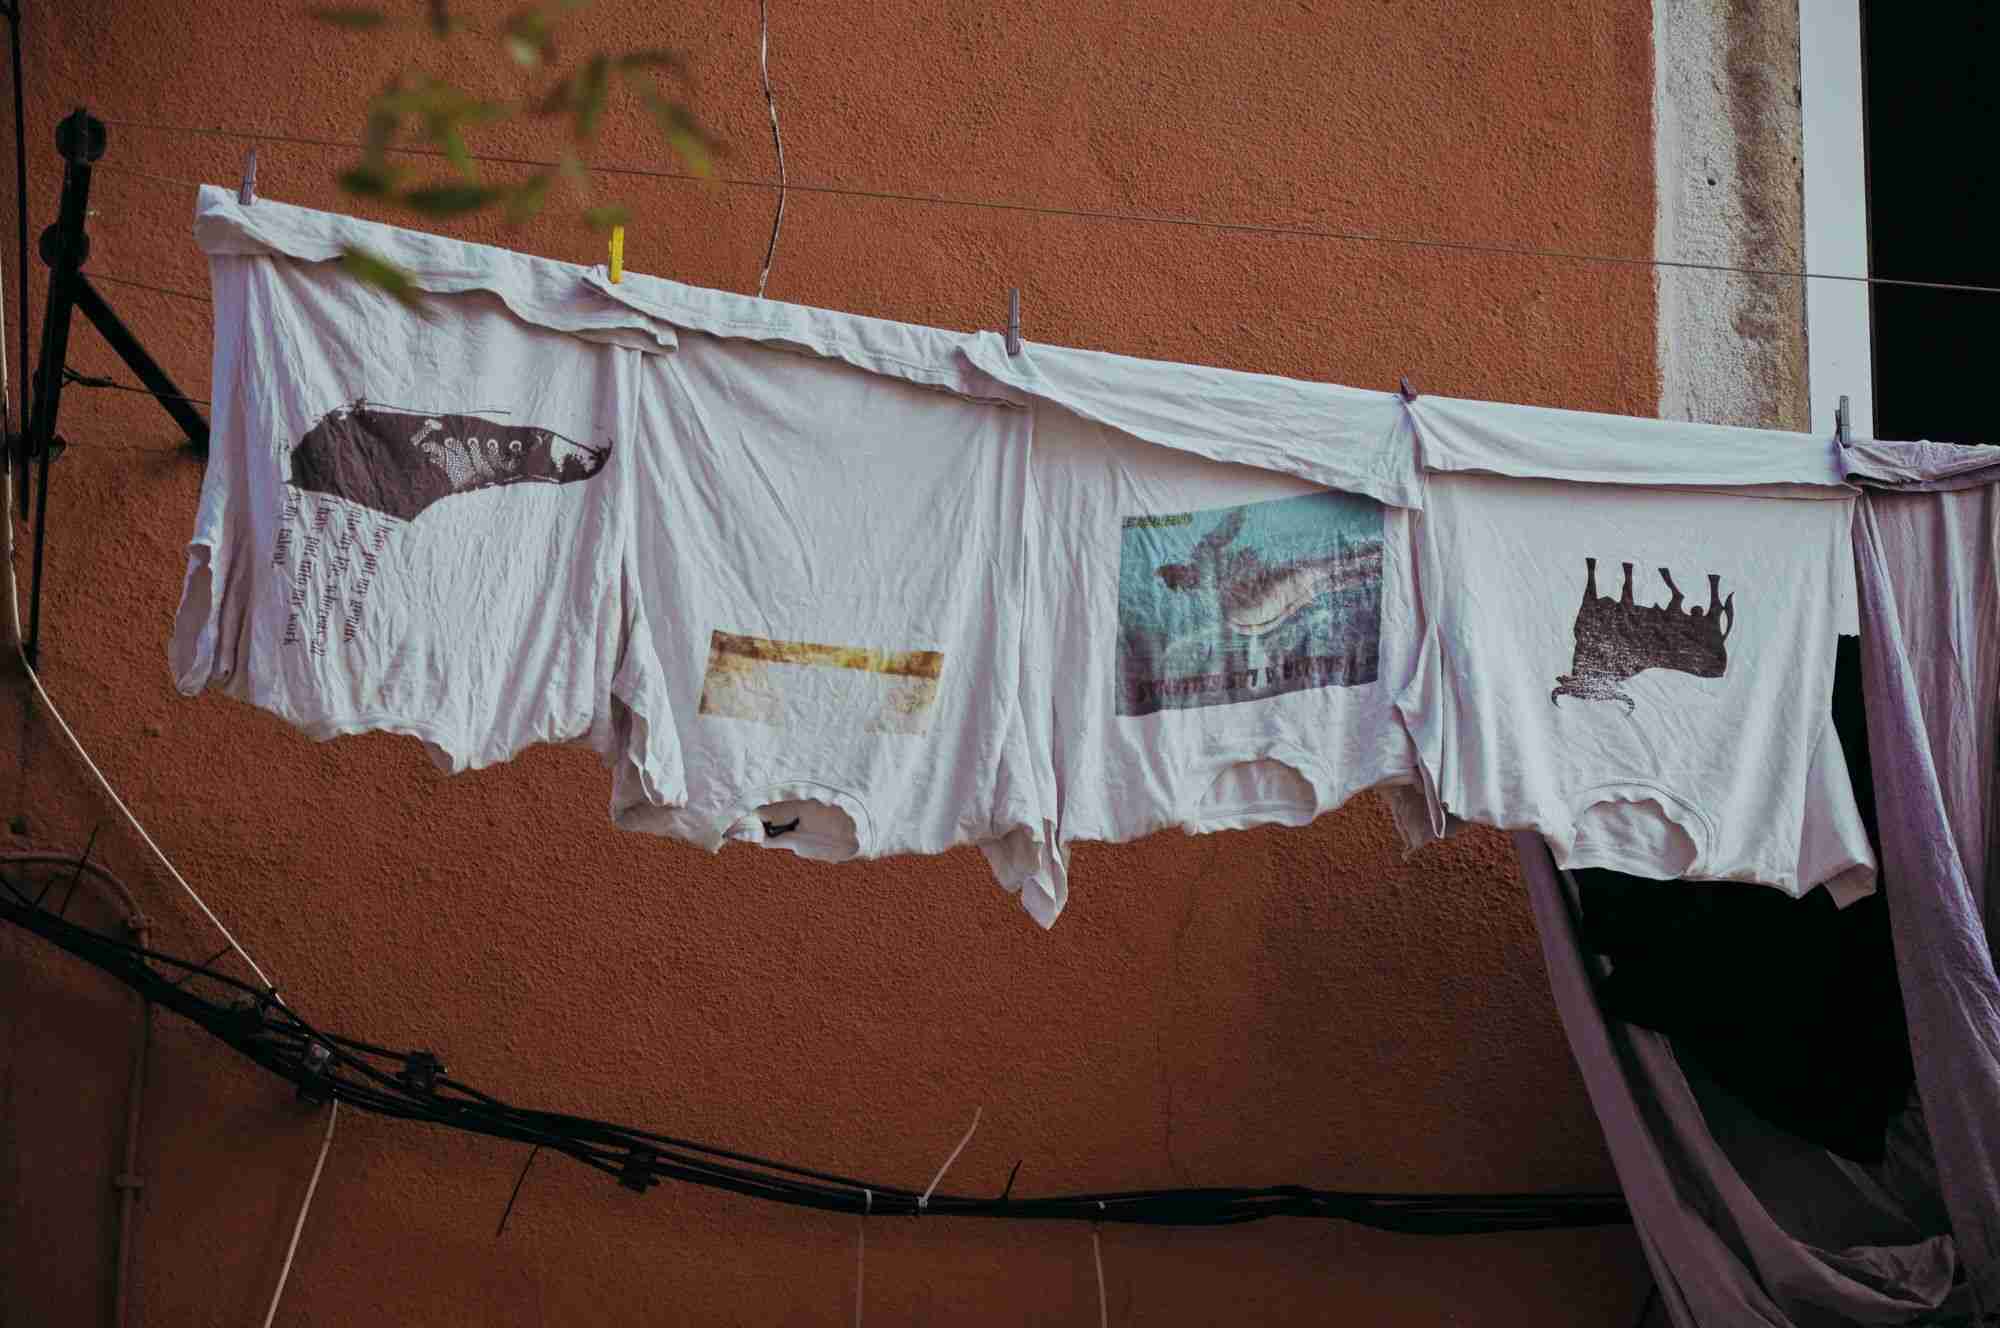 a line of clothes hanging on a clothes line.